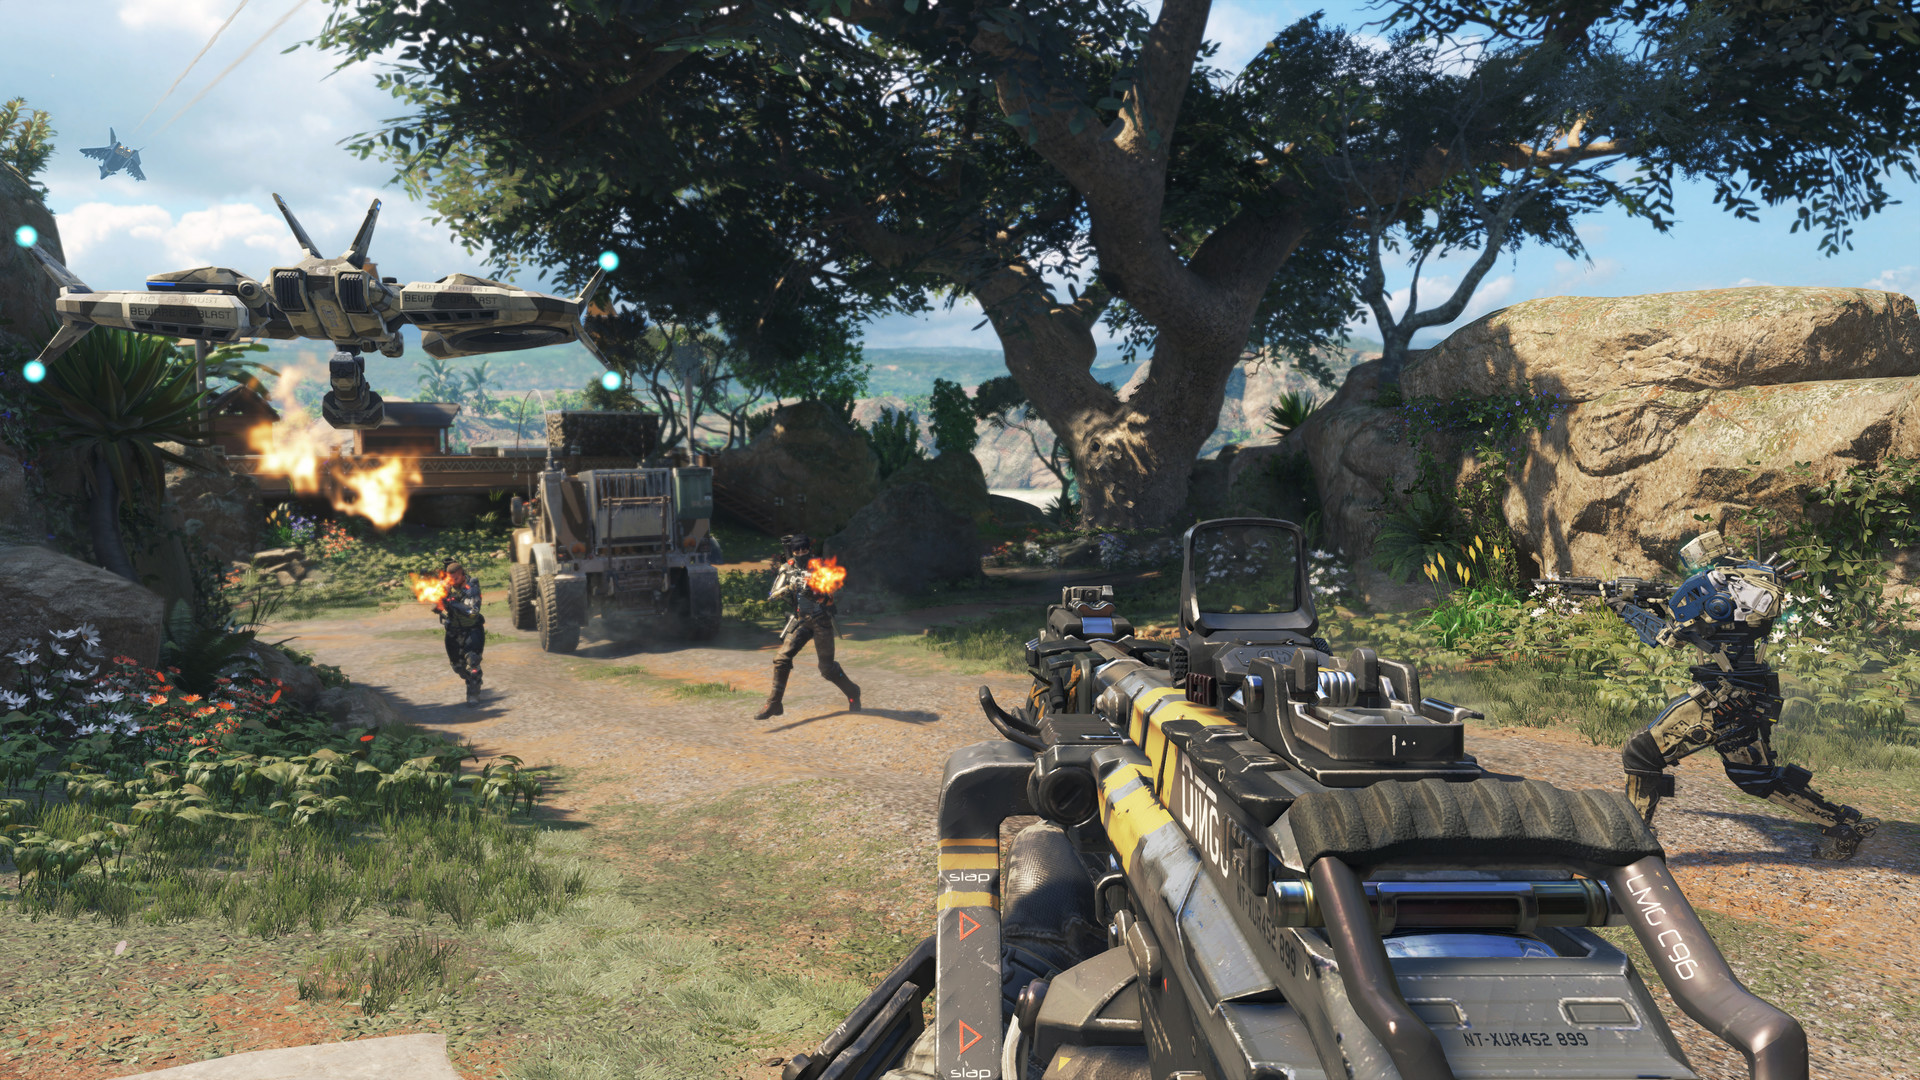 when did black ops 3 come out